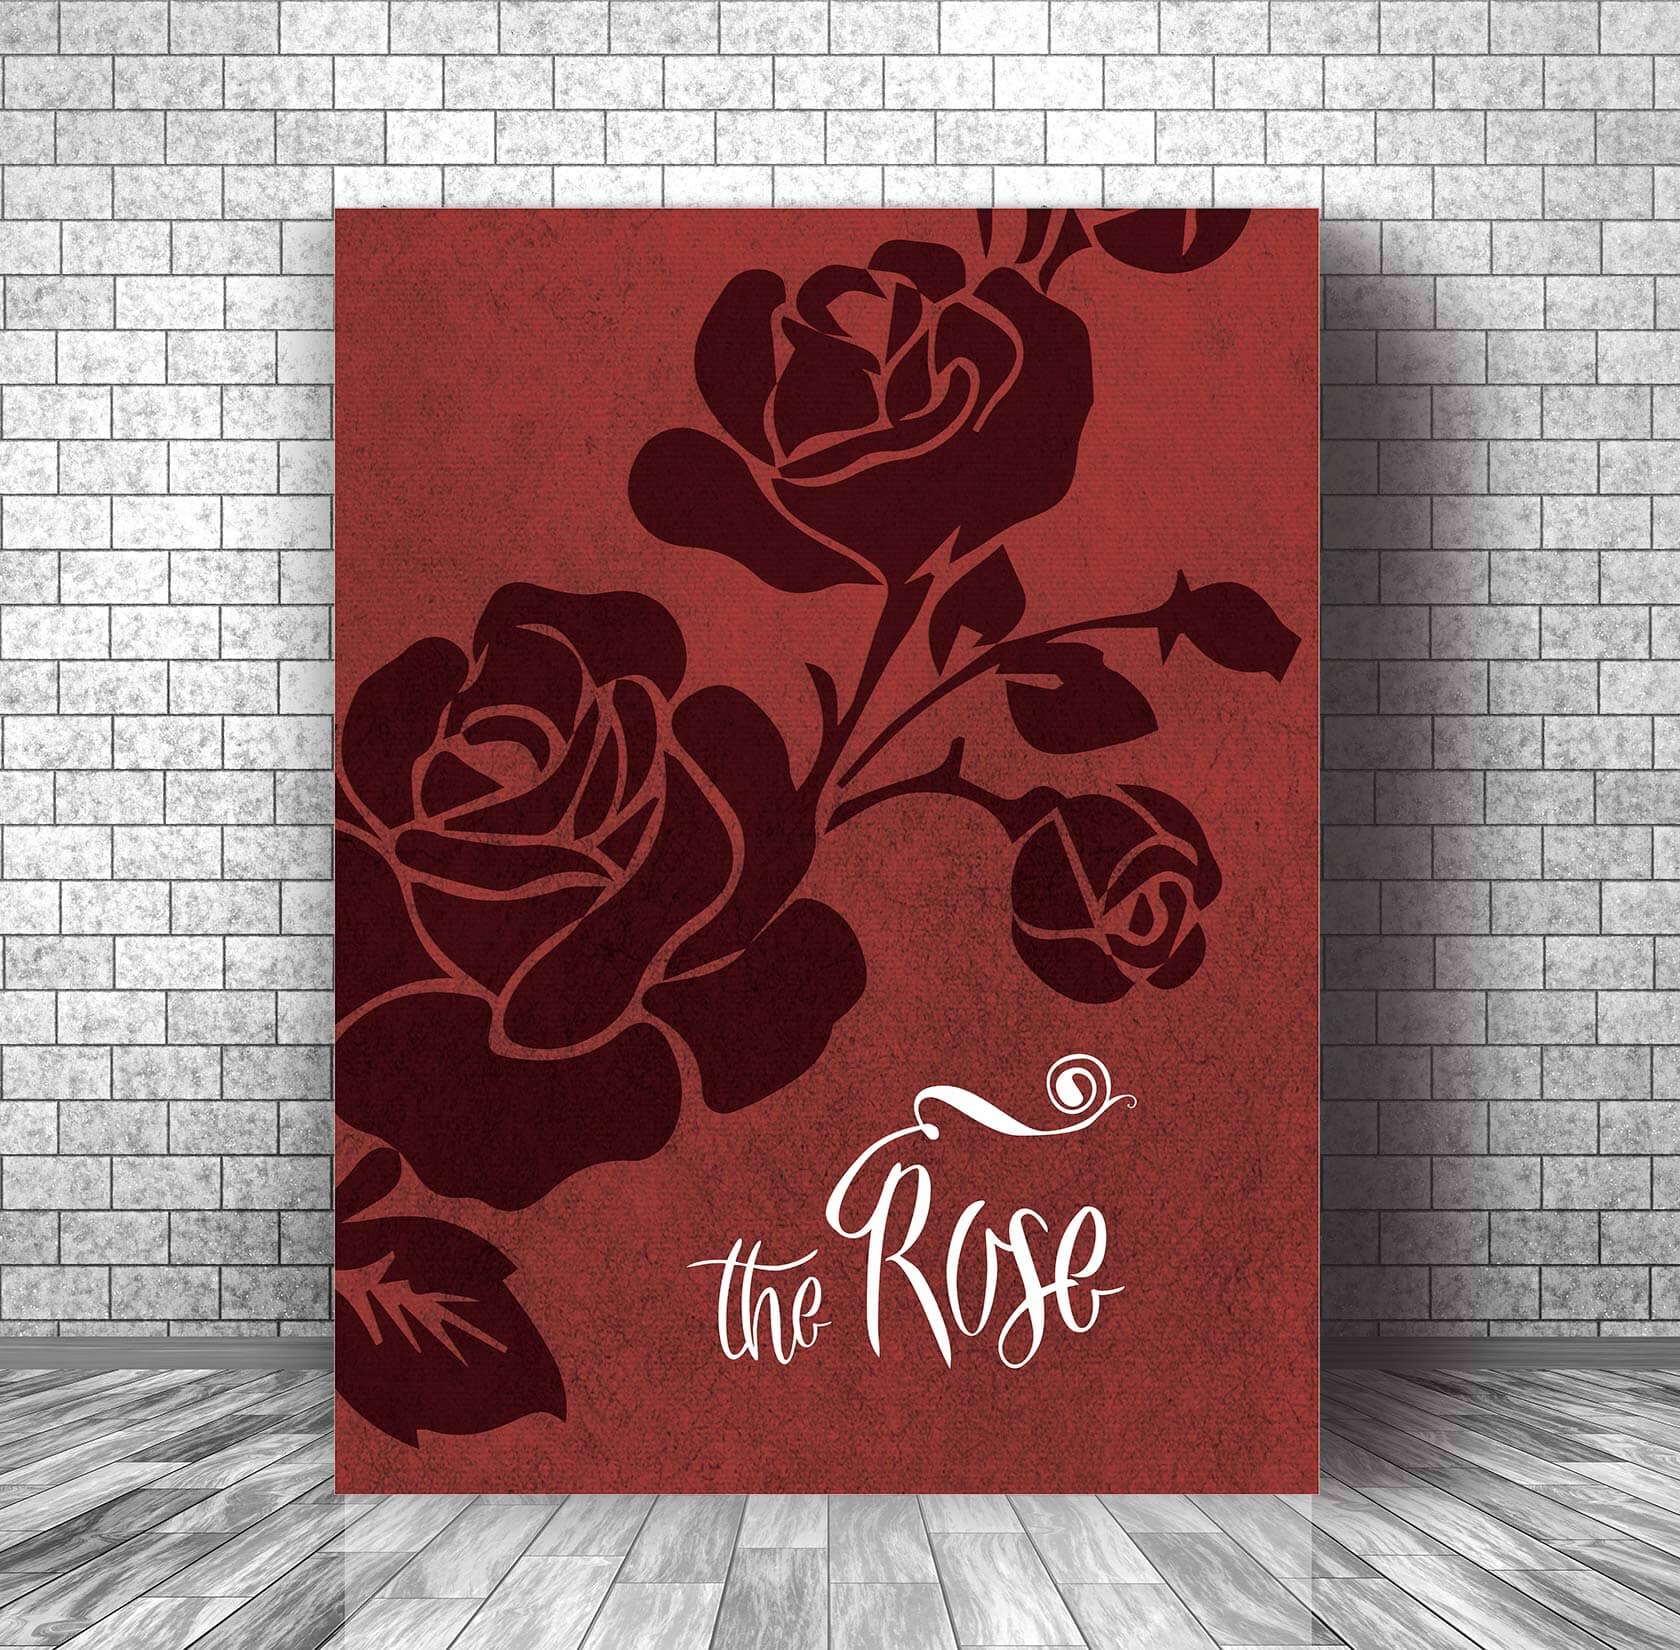 The Rose by Bette Midler - Lyric 70s Music Love Song Print Song Lyrics Art Song Lyrics Art 11x14 Canvas Wrap 